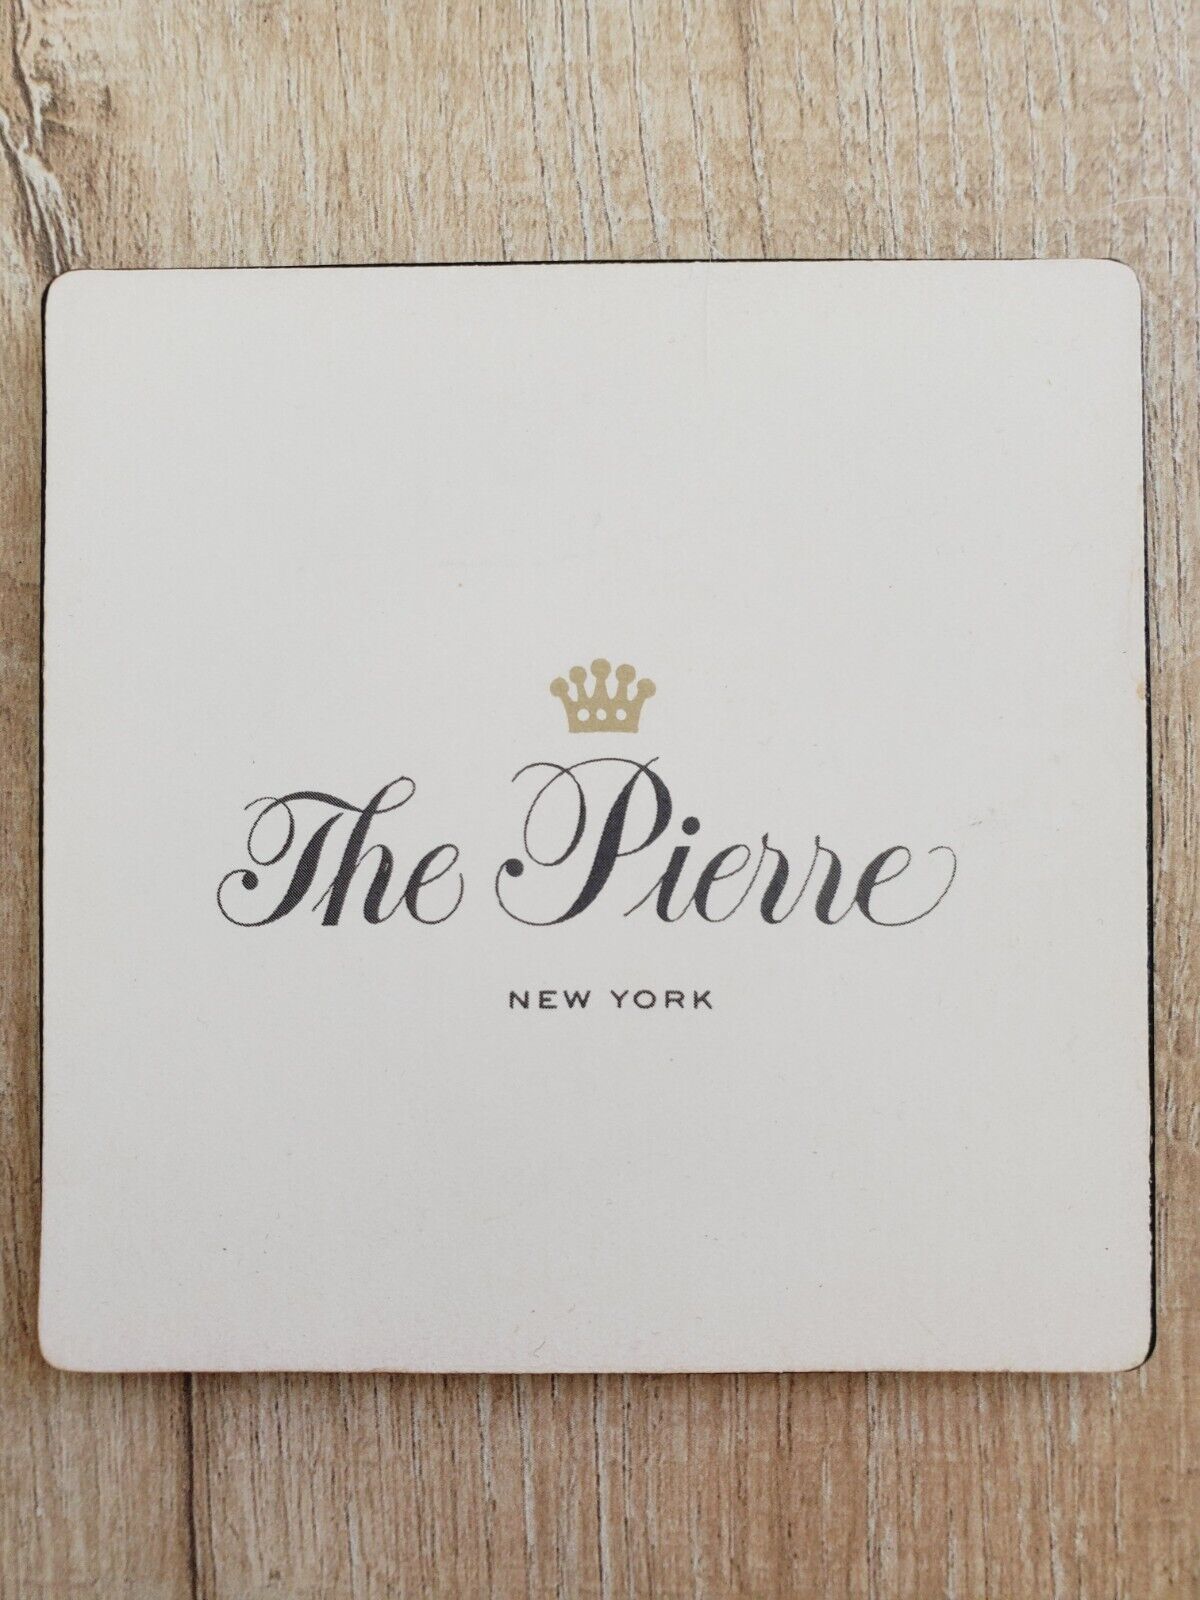 THE PIERRE HOTEL New York Drink Coaster NYC Vintage Hard Board